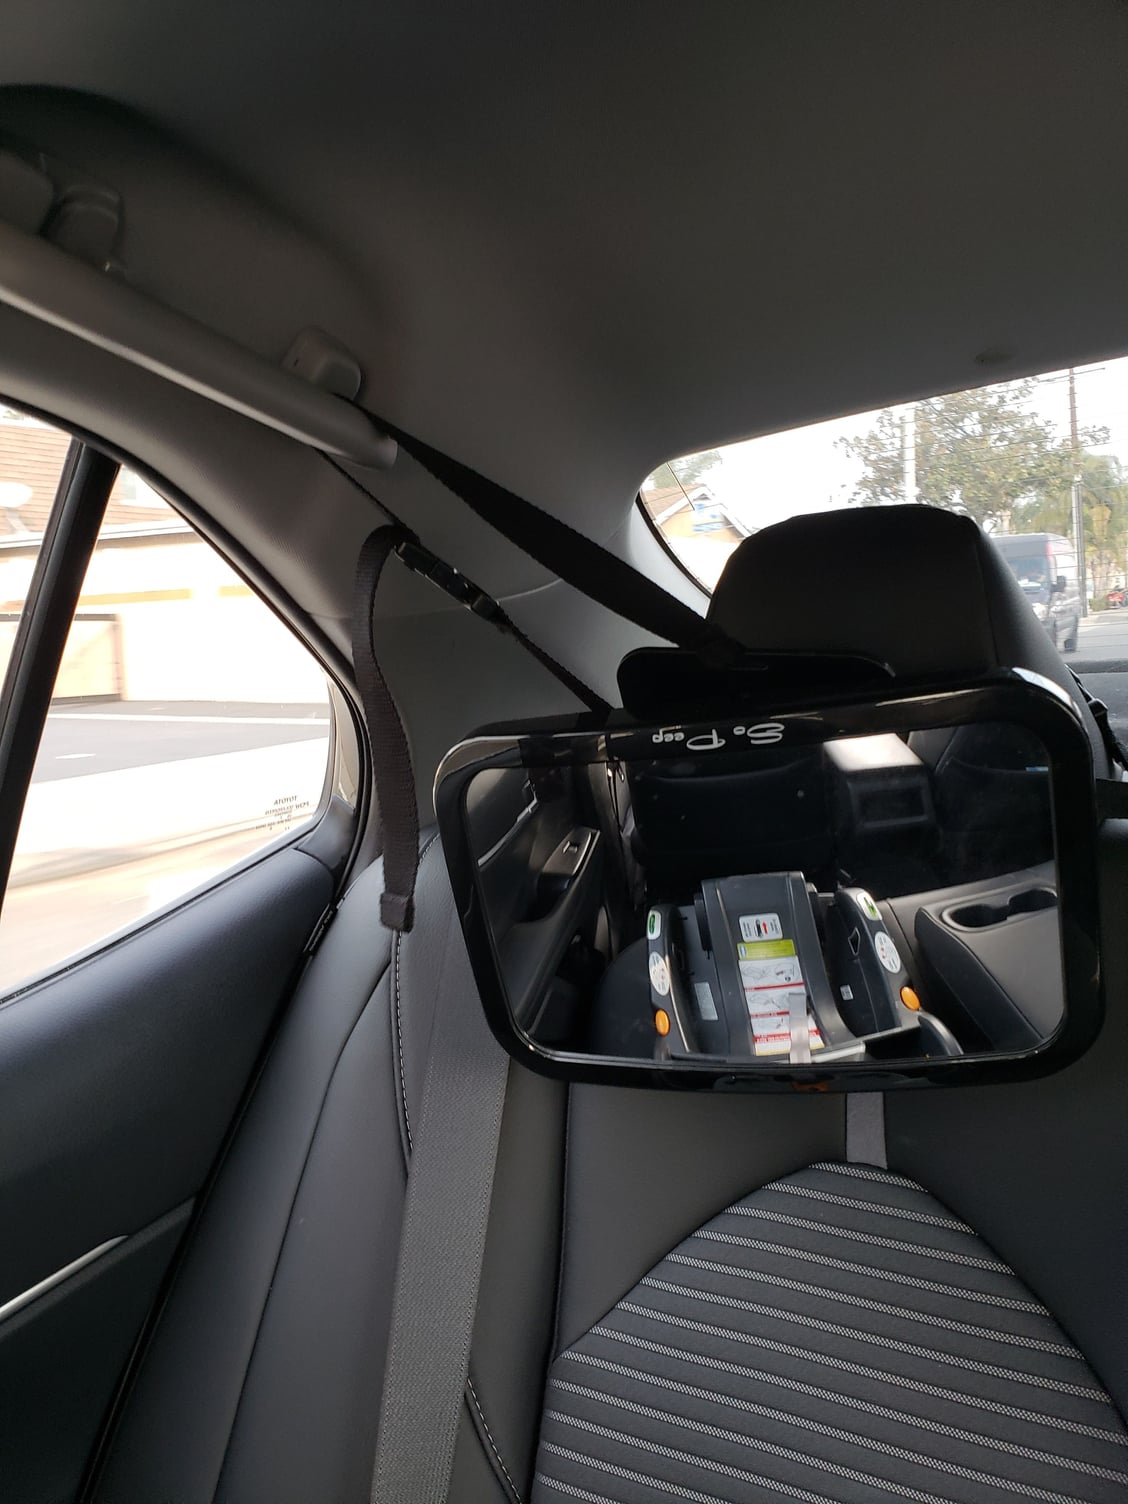 baby car mirror for toyota camry